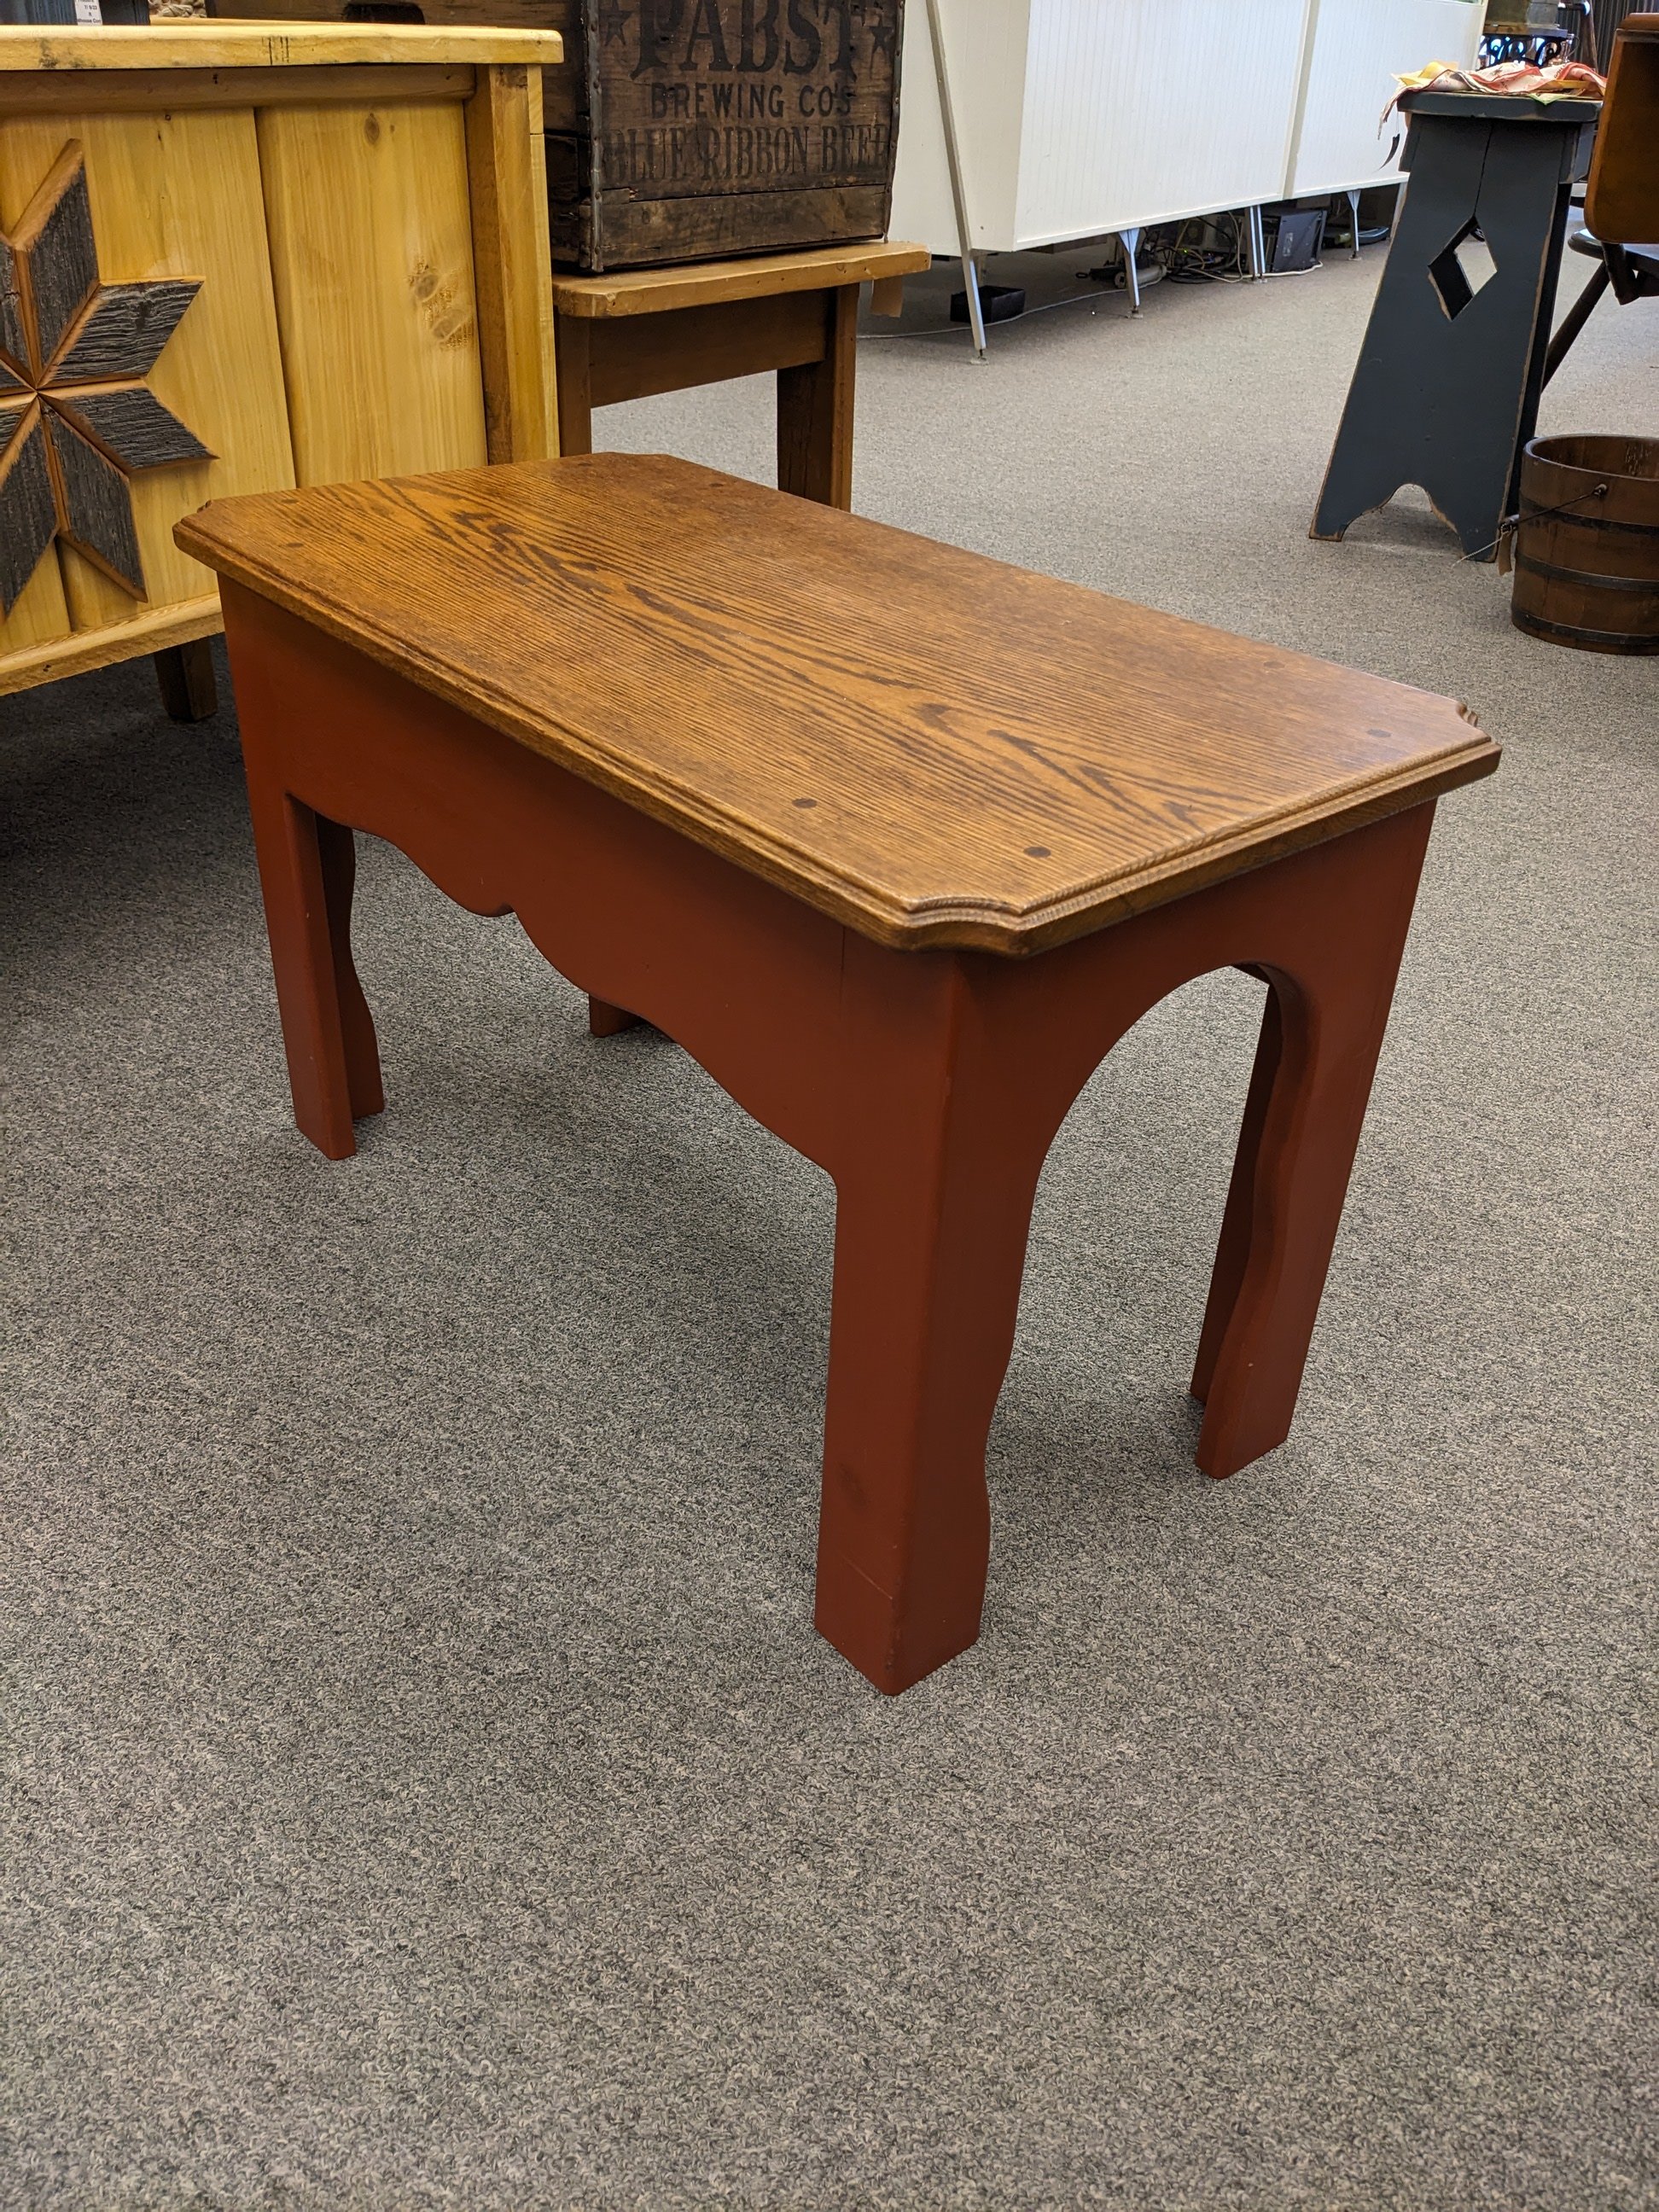 2-Tone Oak/Red Painted Bench